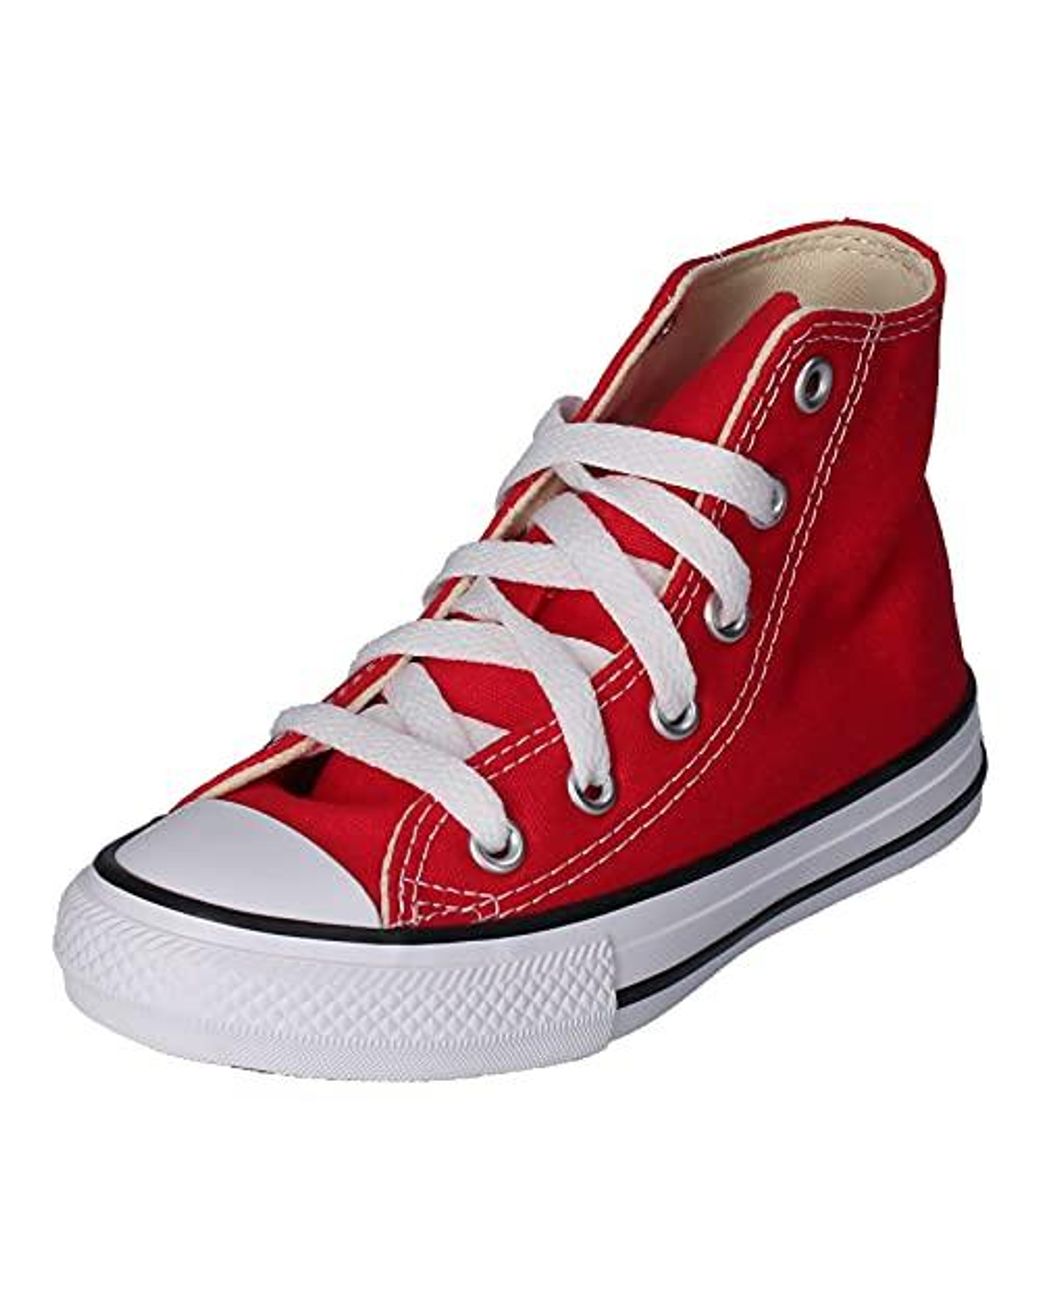 Converse Chuck Taylor All Star Canvas Low Top Sneaker in Red | Lyst